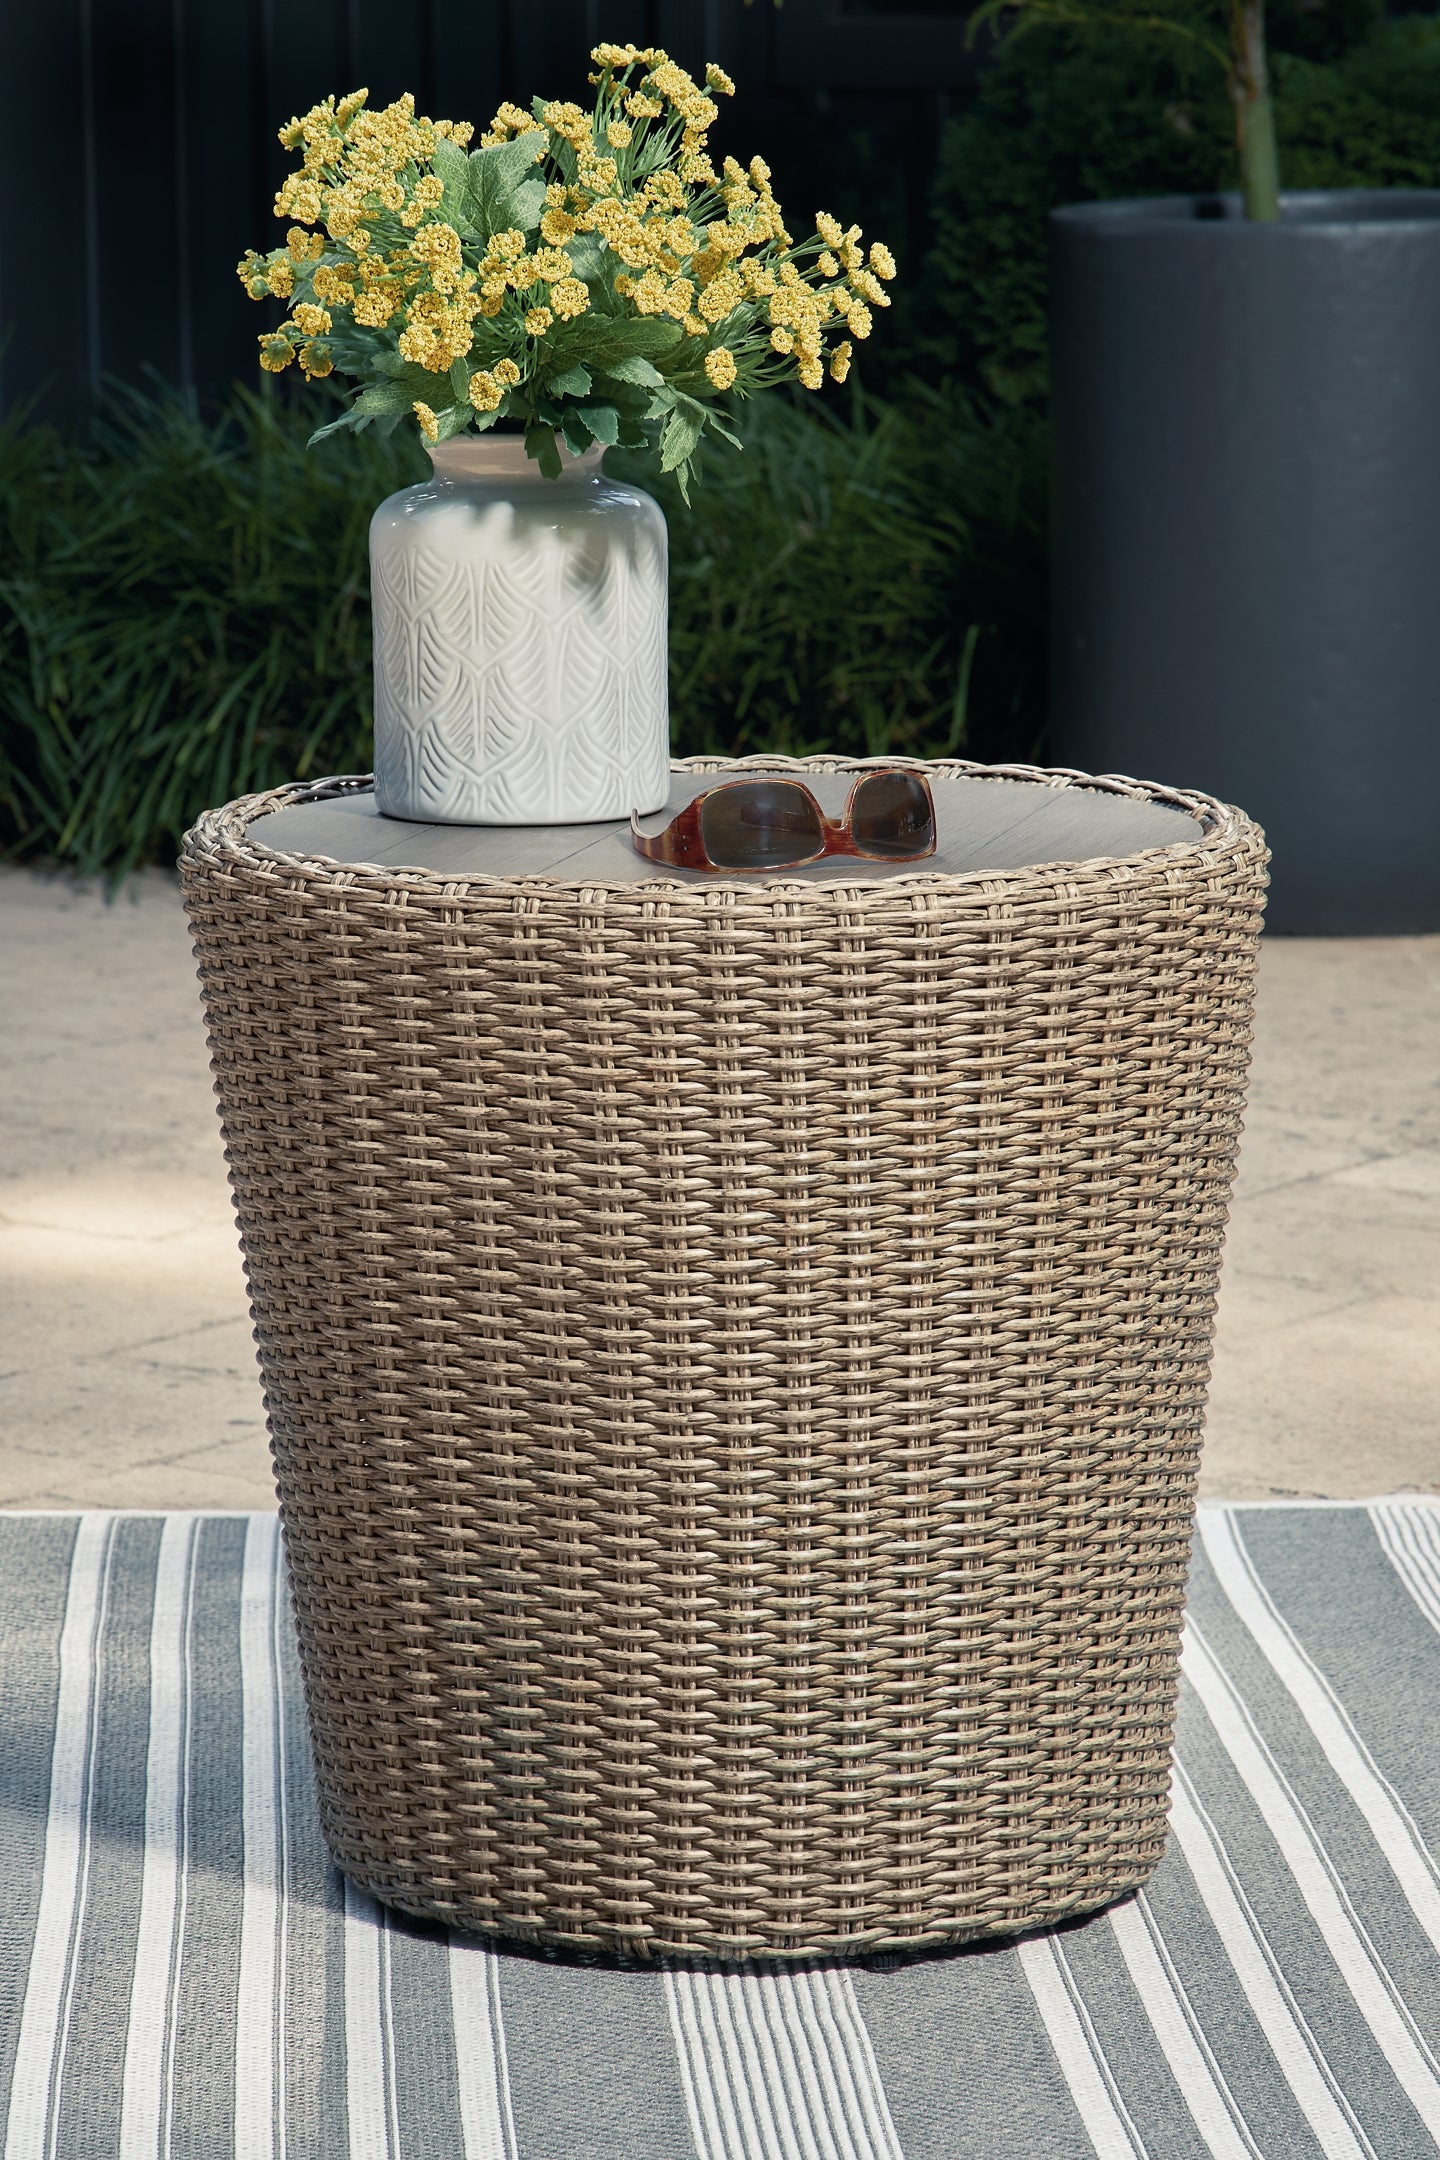 Danson Outdoor Coffee Table with 2 End Tables Signature Design by Ashley®